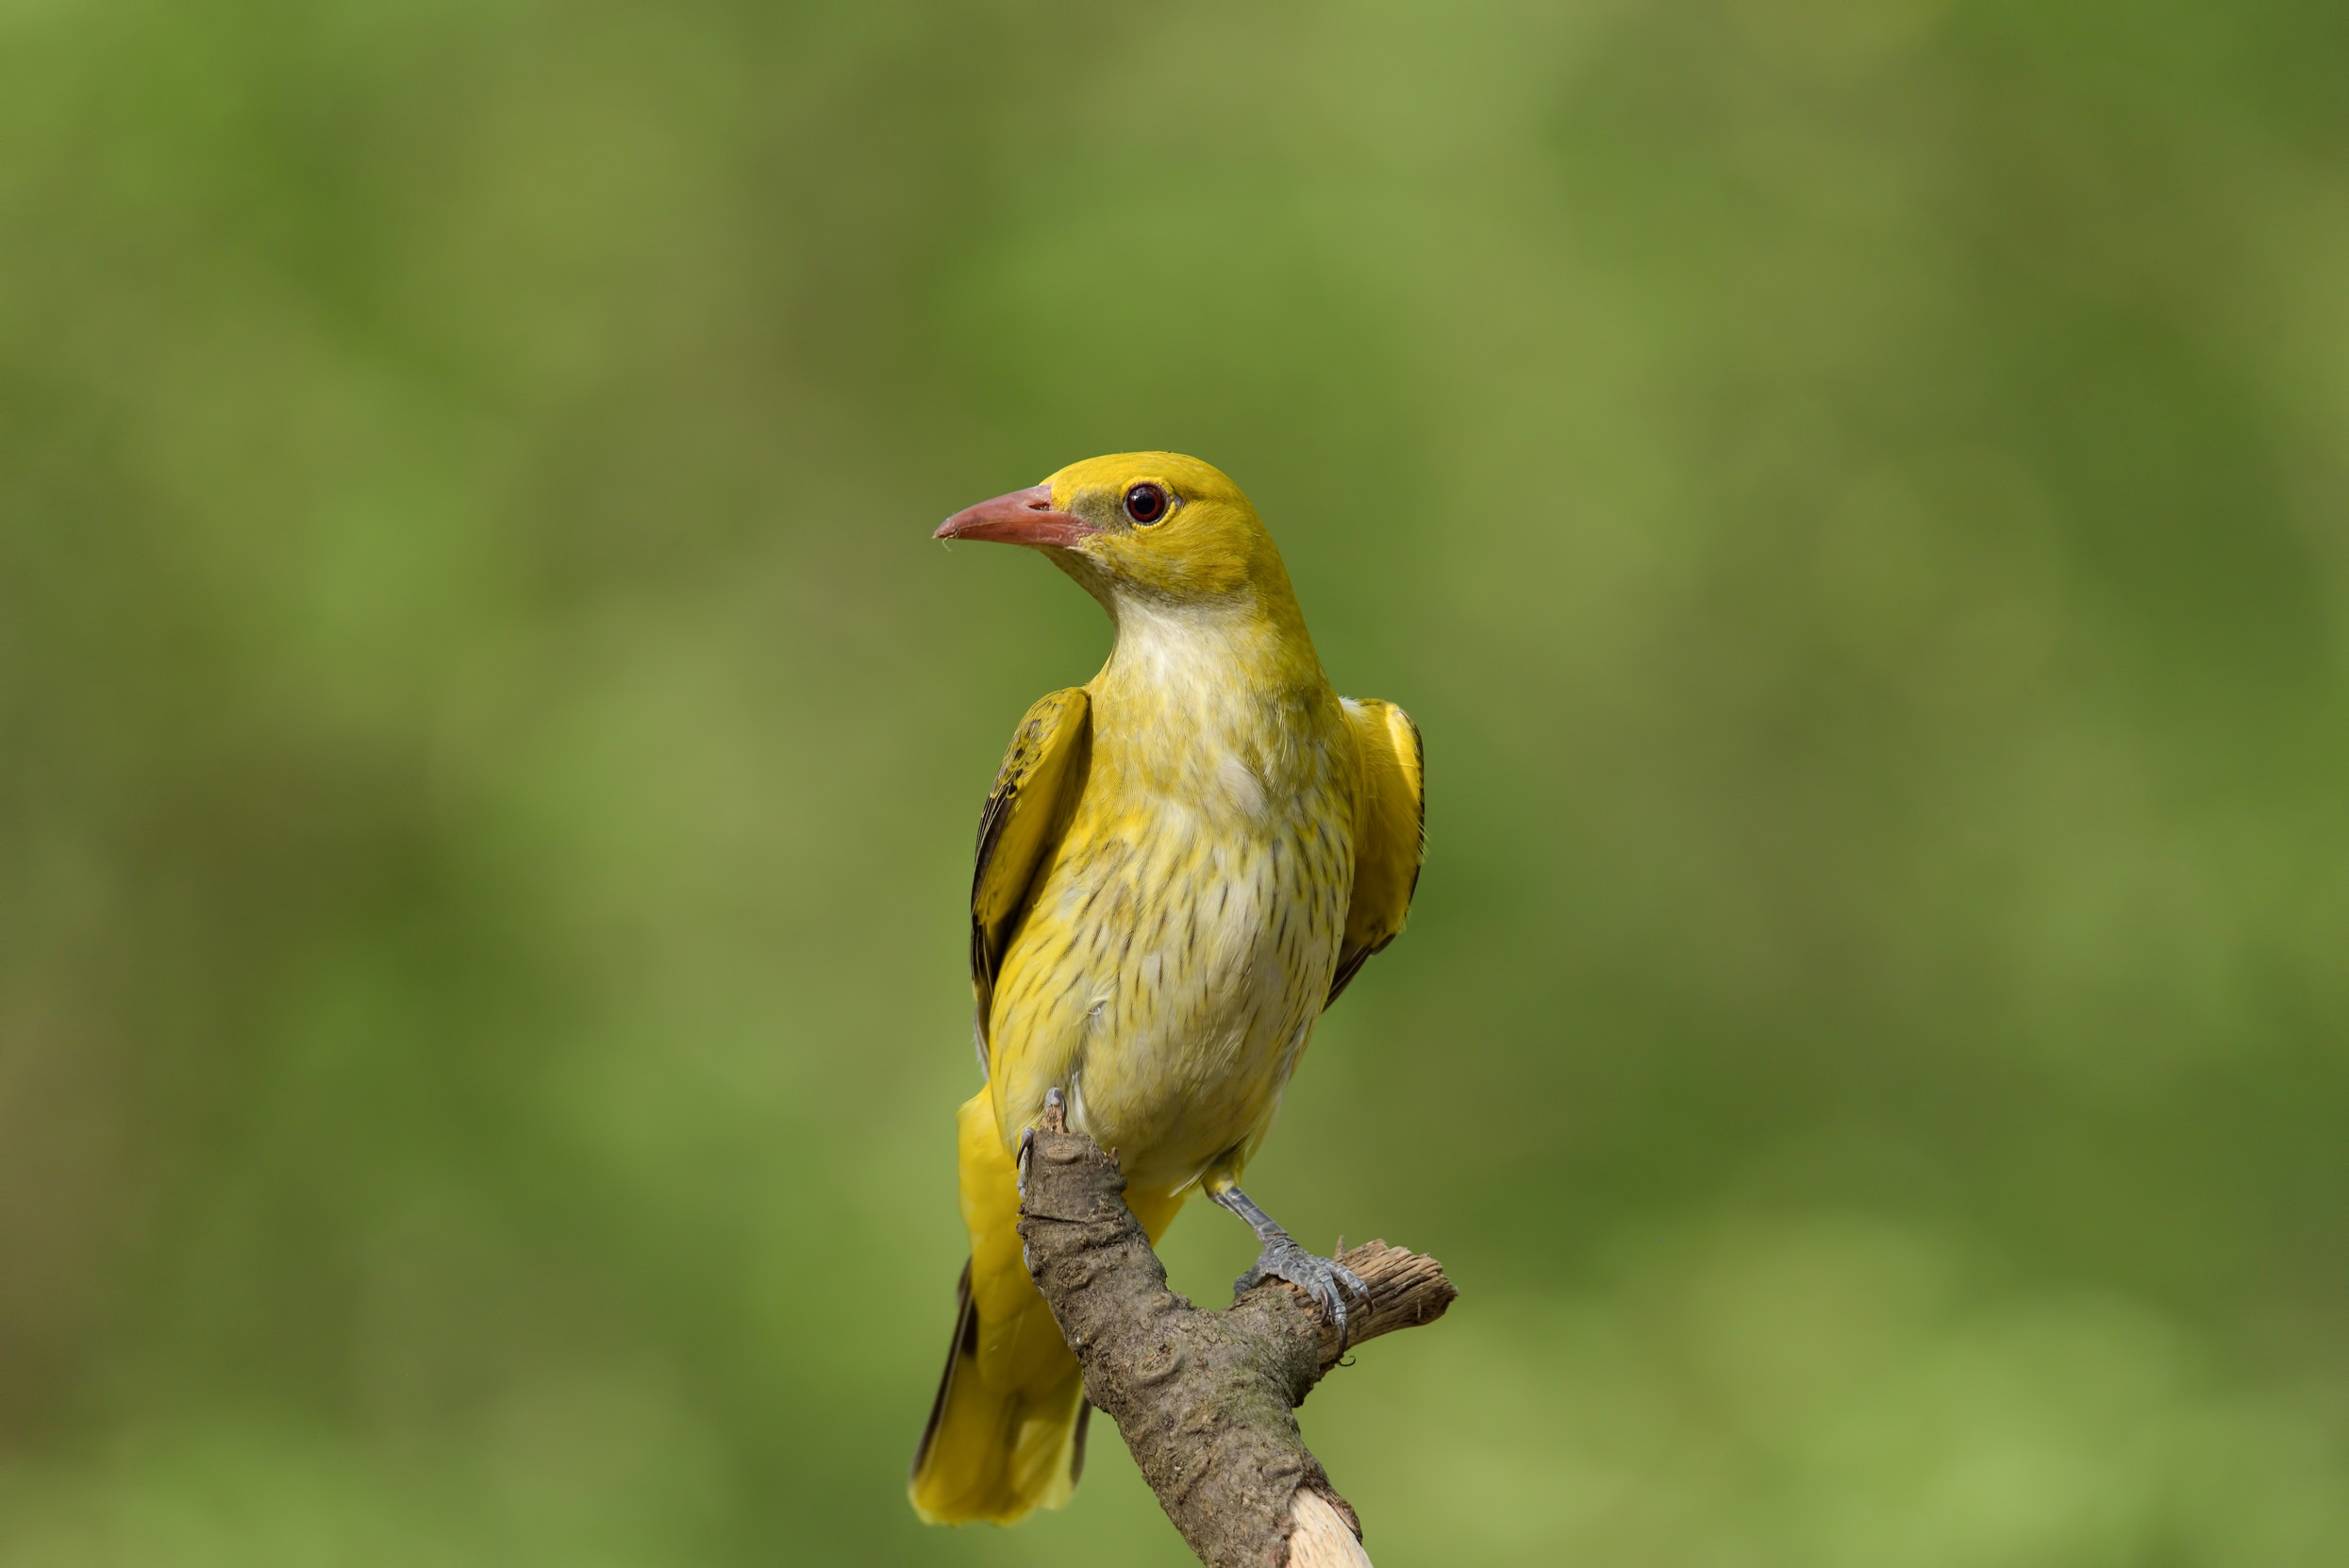 A female Golden Oriole perched on the top of a branch.